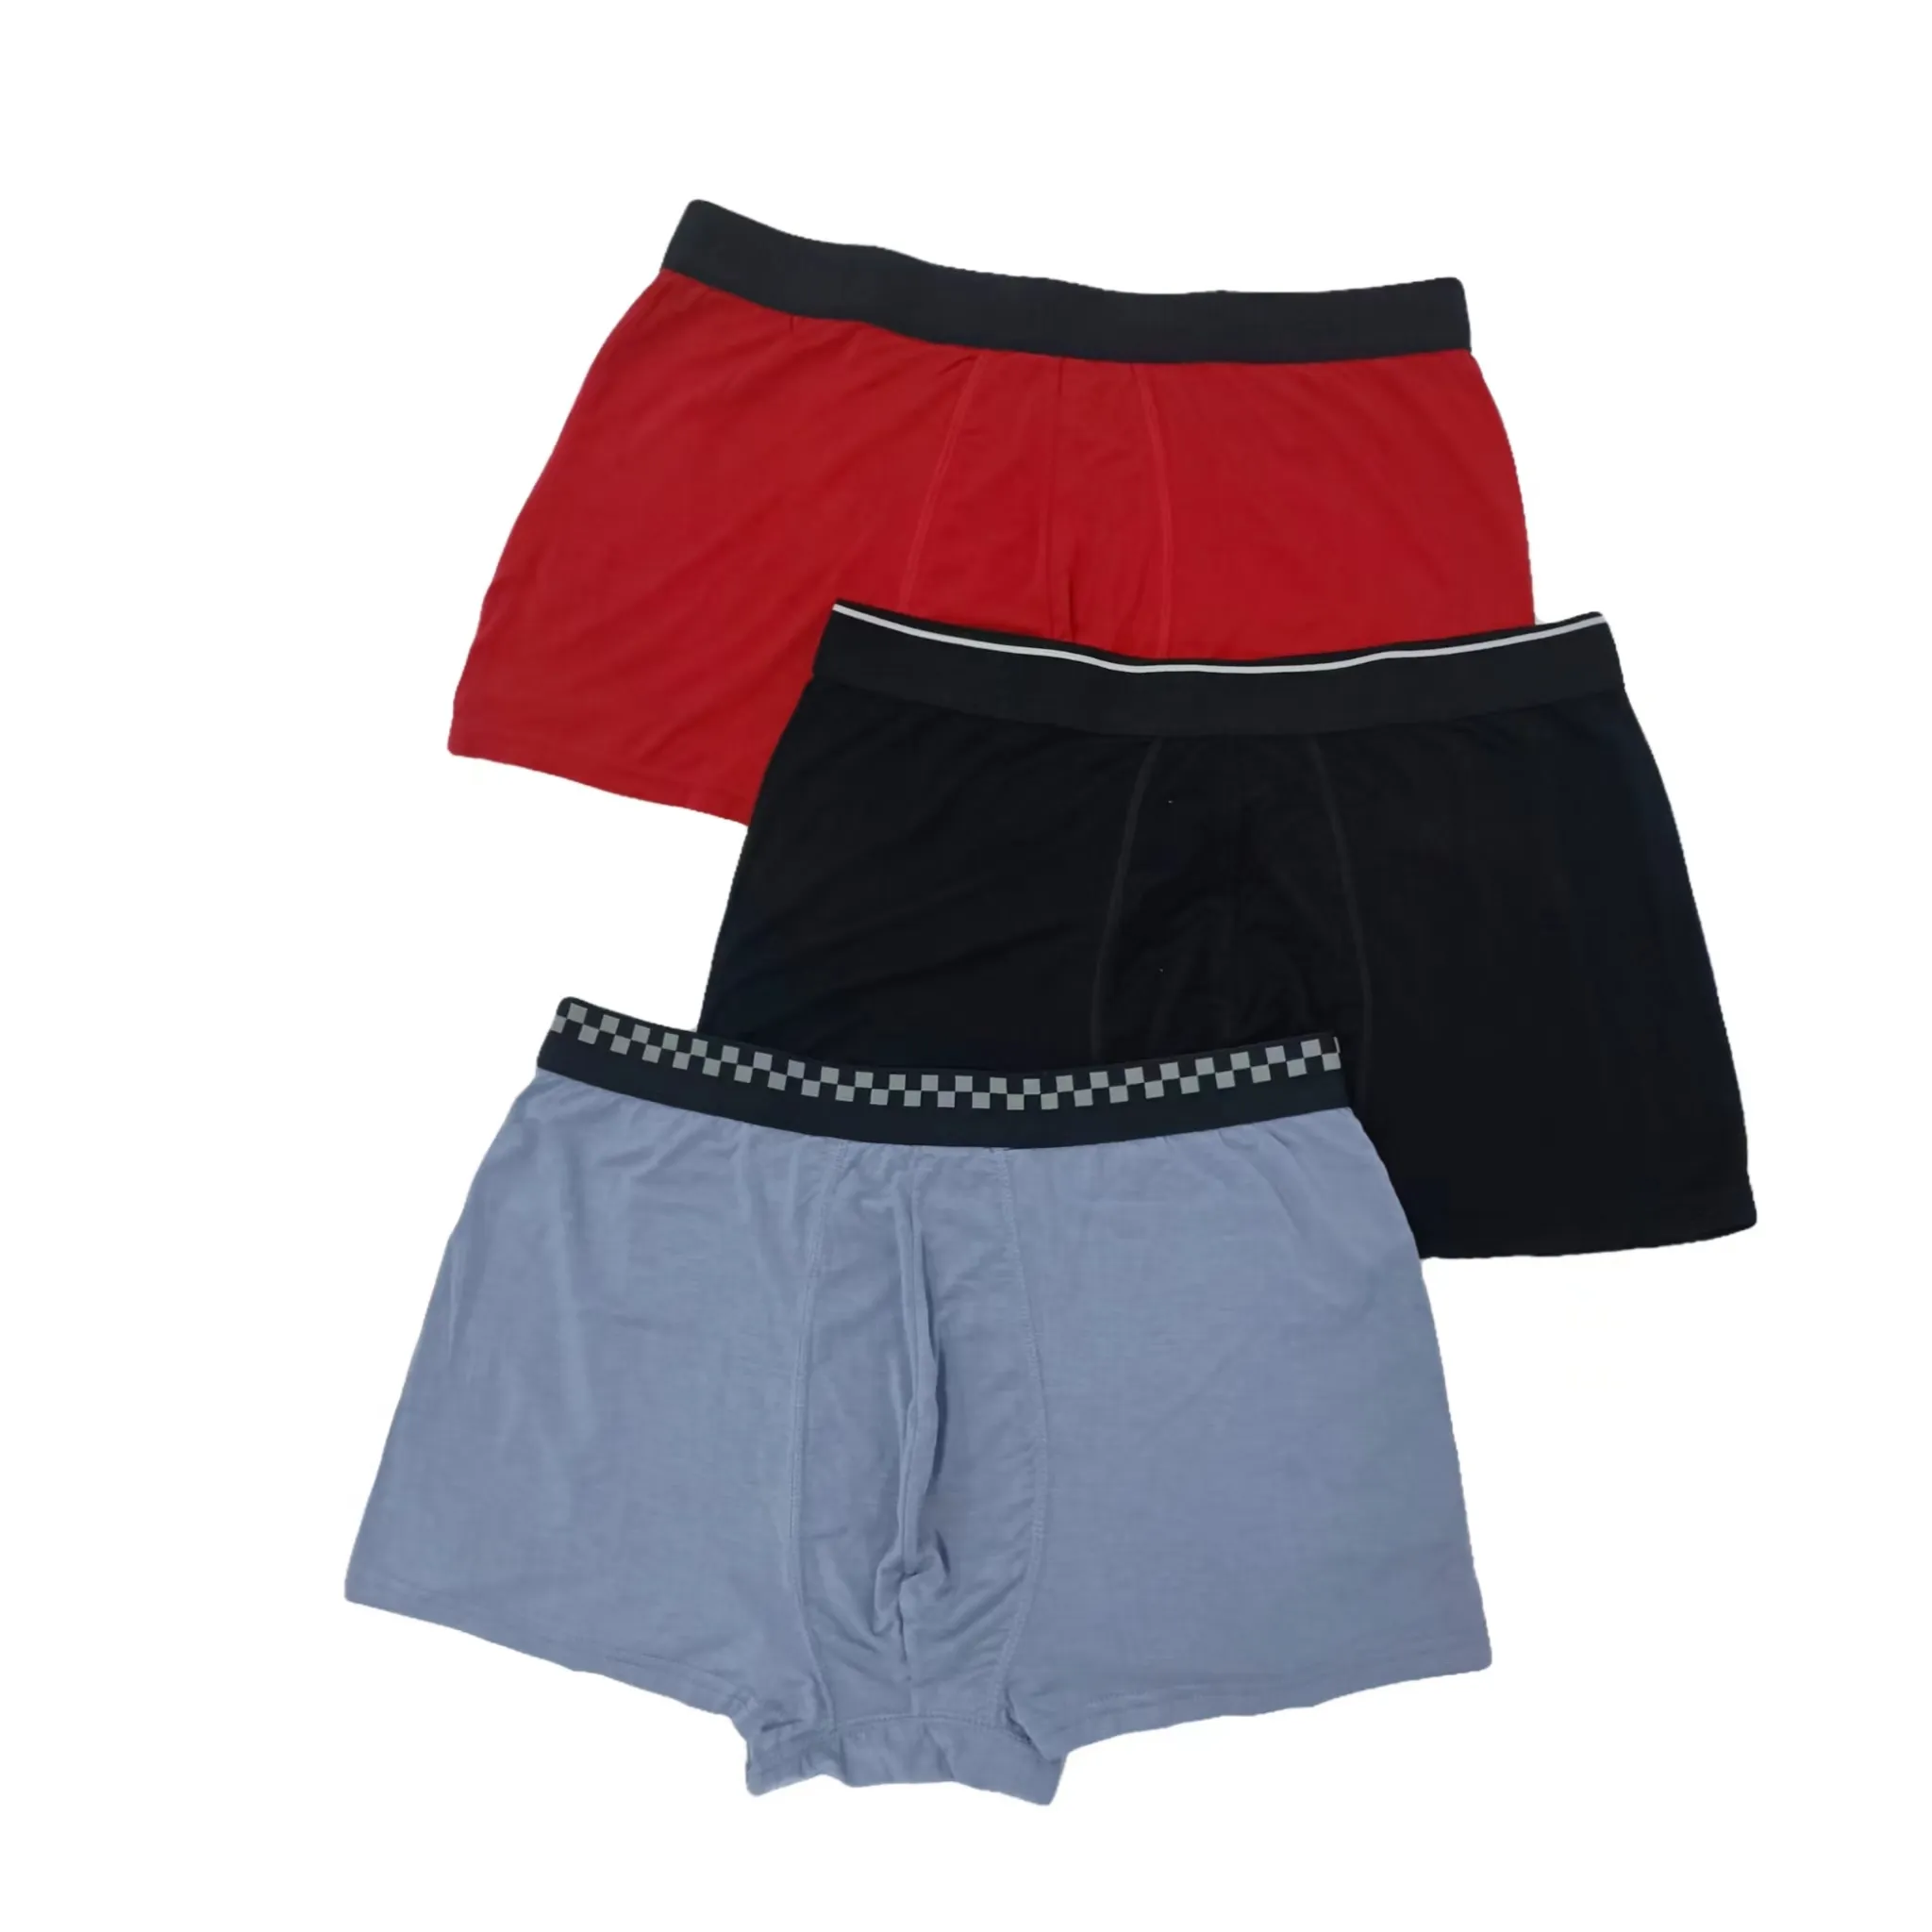 China's Best Selling Four Seasons Underwear Breathable Durable Comfortable 100%cotton Men's boxer shorts